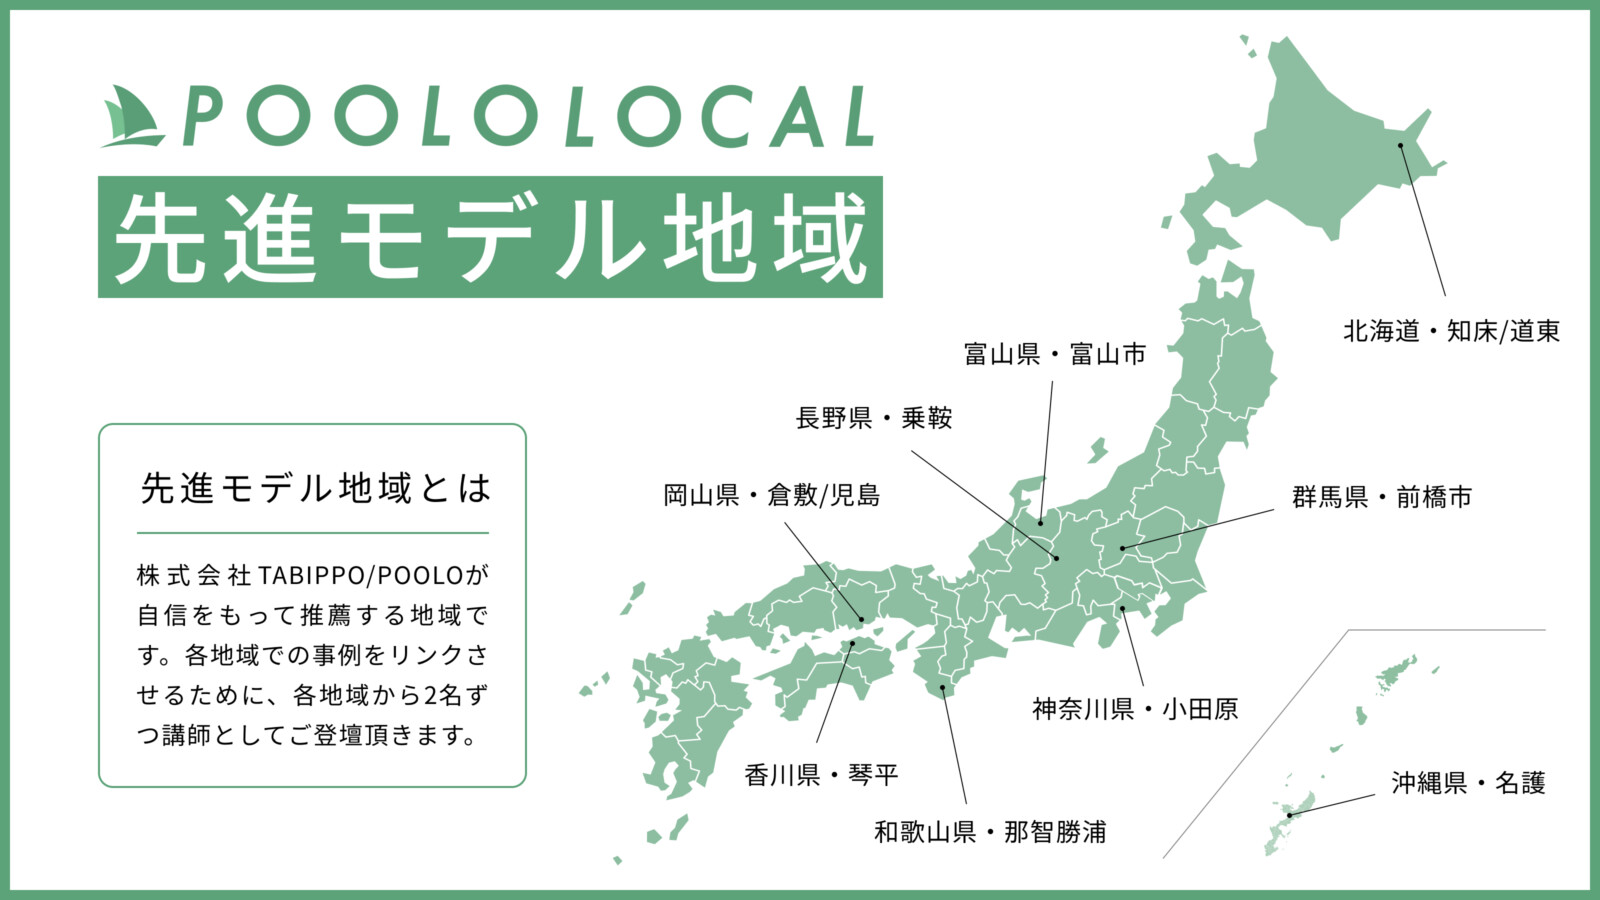 POOLO LOCAL認定モデル地域